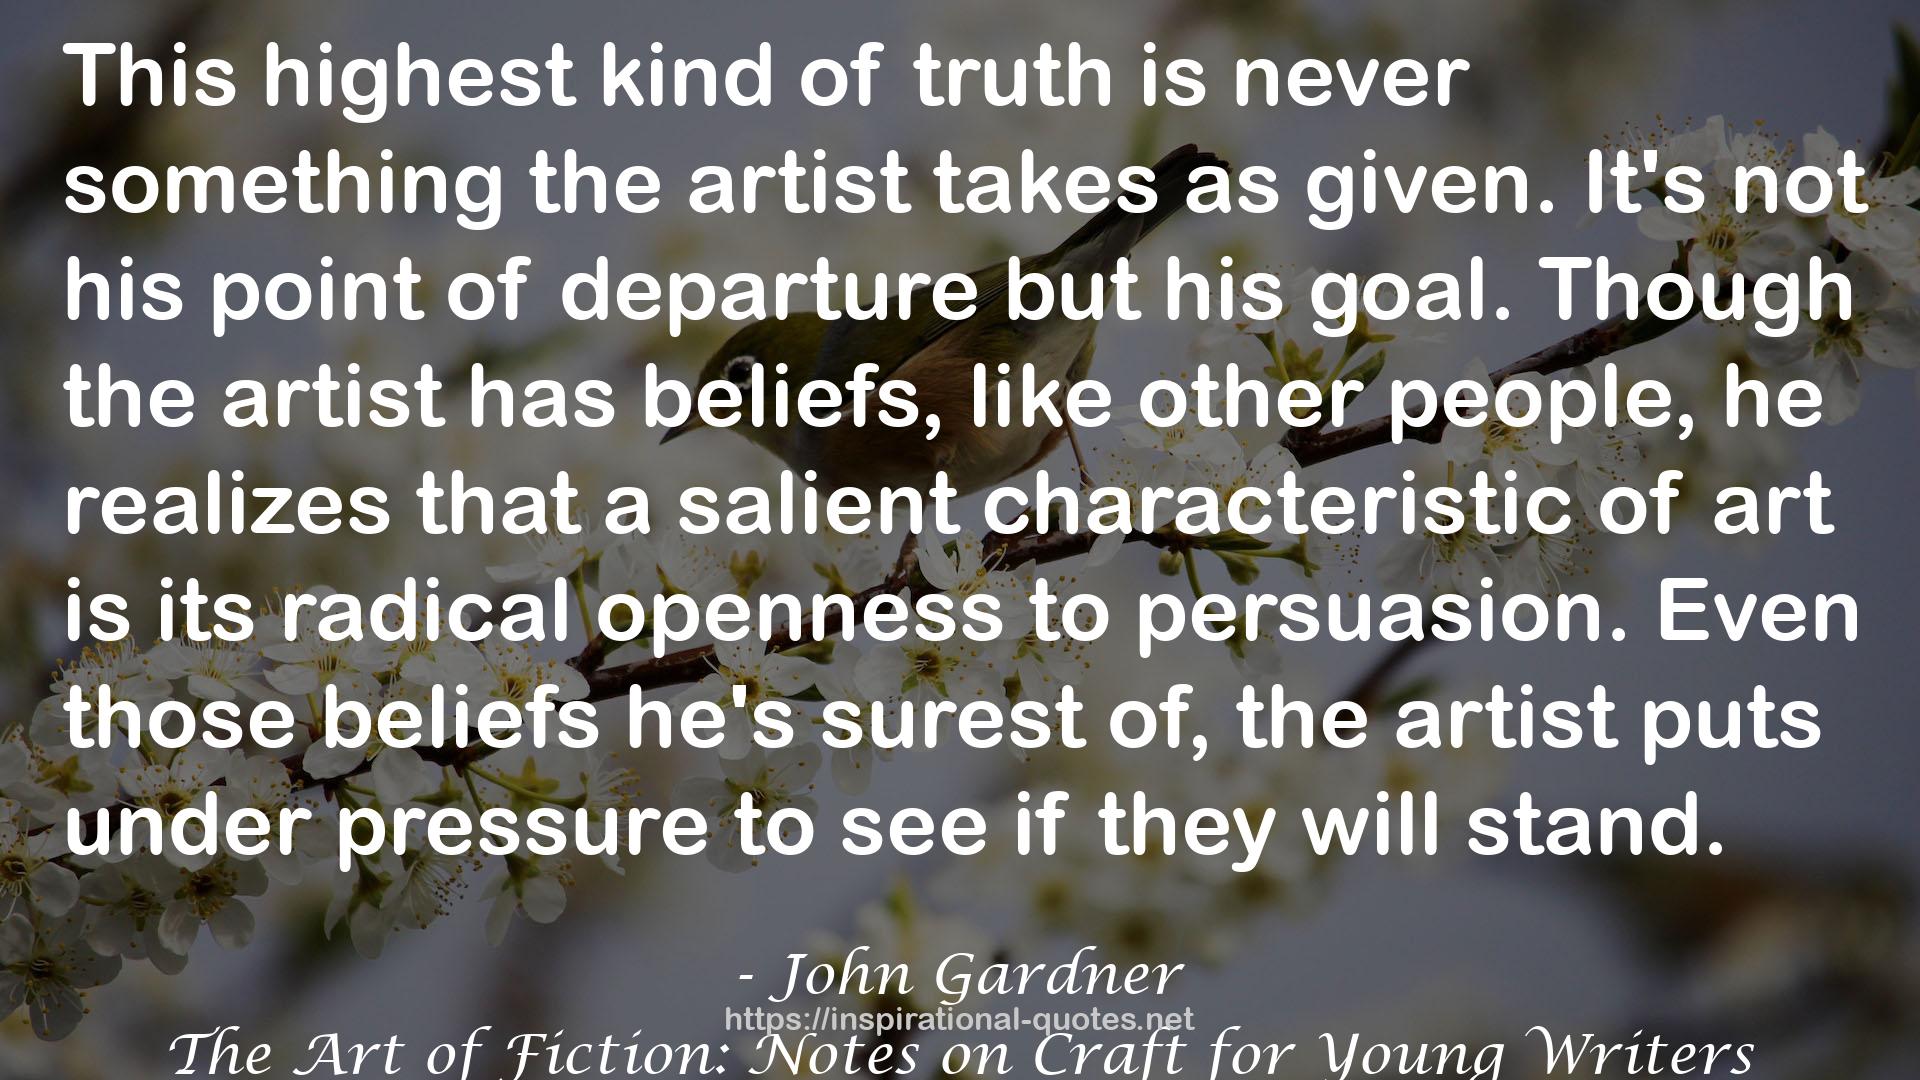 The Art of Fiction: Notes on Craft for Young Writers QUOTES